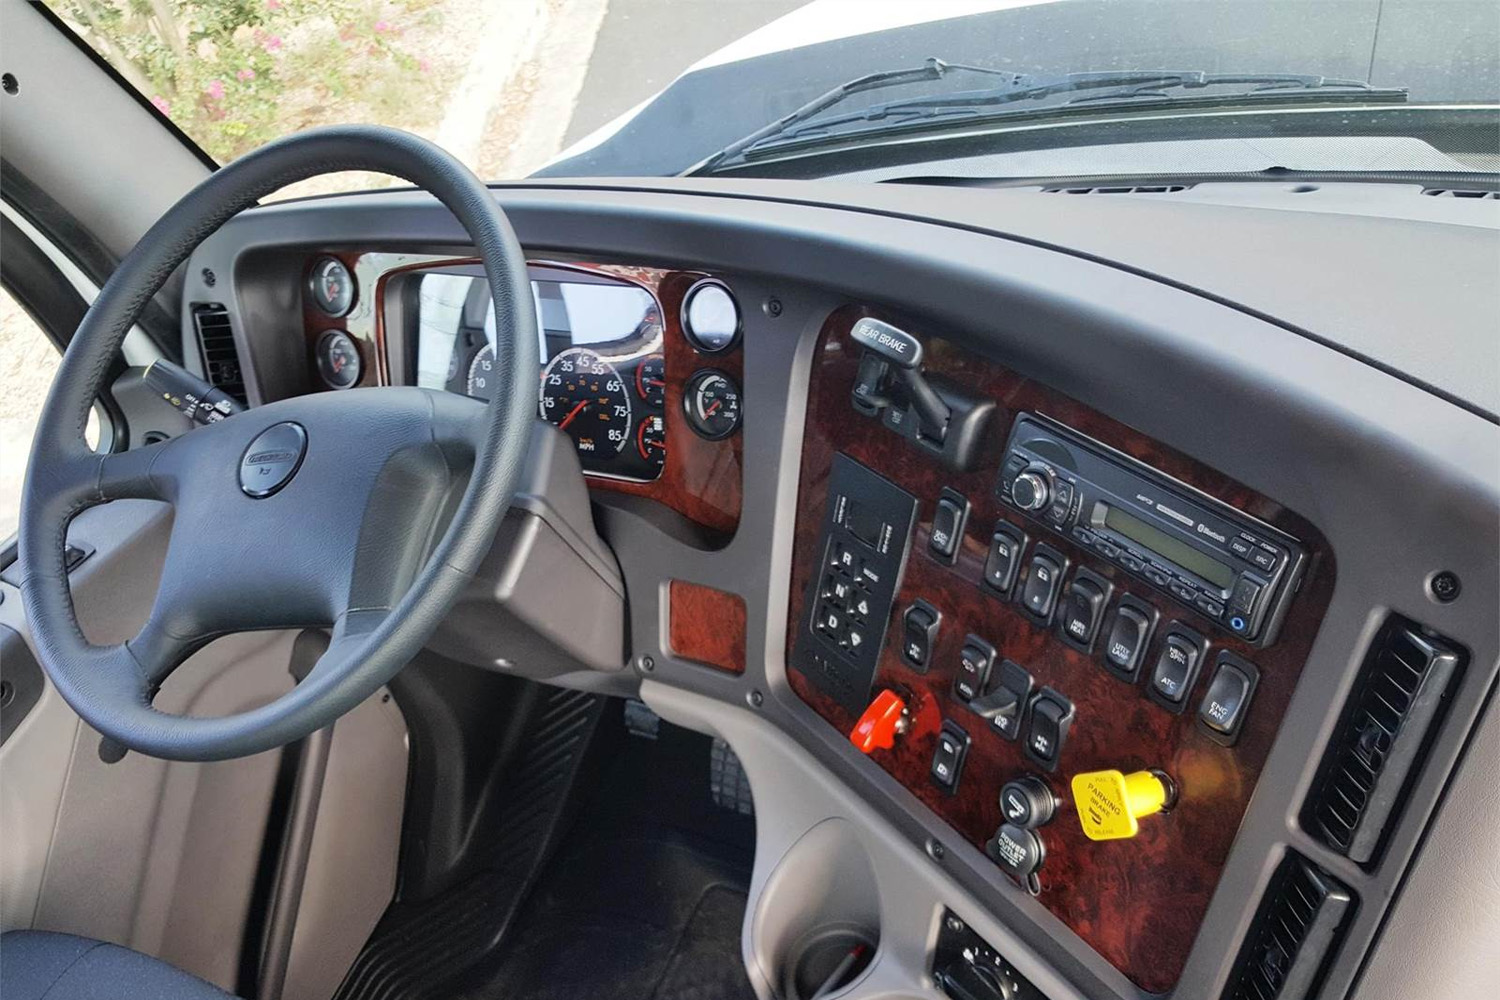 Cab view of a new concrete truck.